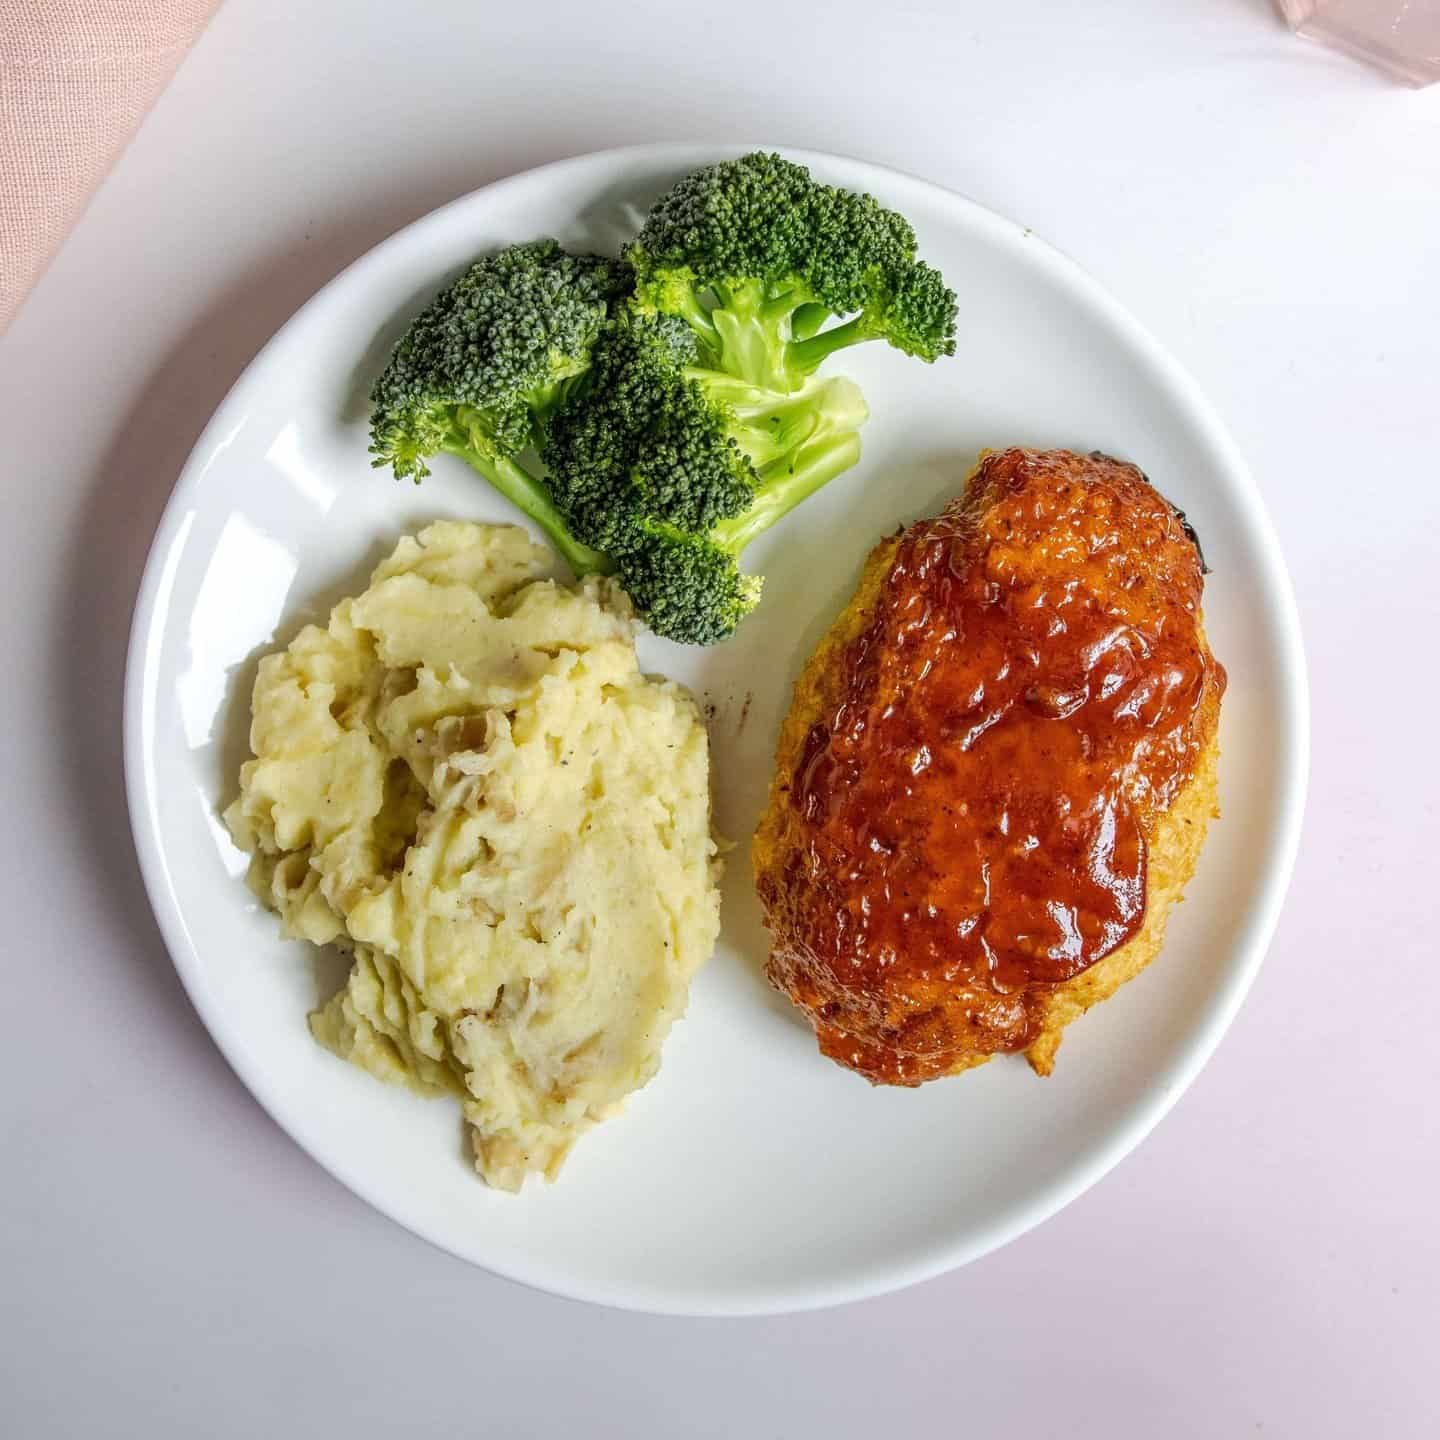 Mini BBQ Chicken Meatloaves are a quick 30-minute weeknight dinner. No fuss, easy cleanup. You can add mashed potatoes and broccoli to round out the meal!⁠⁣
⁠⁣
Recipe link in the bio.⁠⁣
⁣
⁠ #meganvskitchen #easyrecipes #food52 #thekitchn #buzzfeedfood #feedfeed #bhgfood #todayfood #quickdinner #dinnerideas #dinnerrecipes #meatloaf #healthydinnerideas